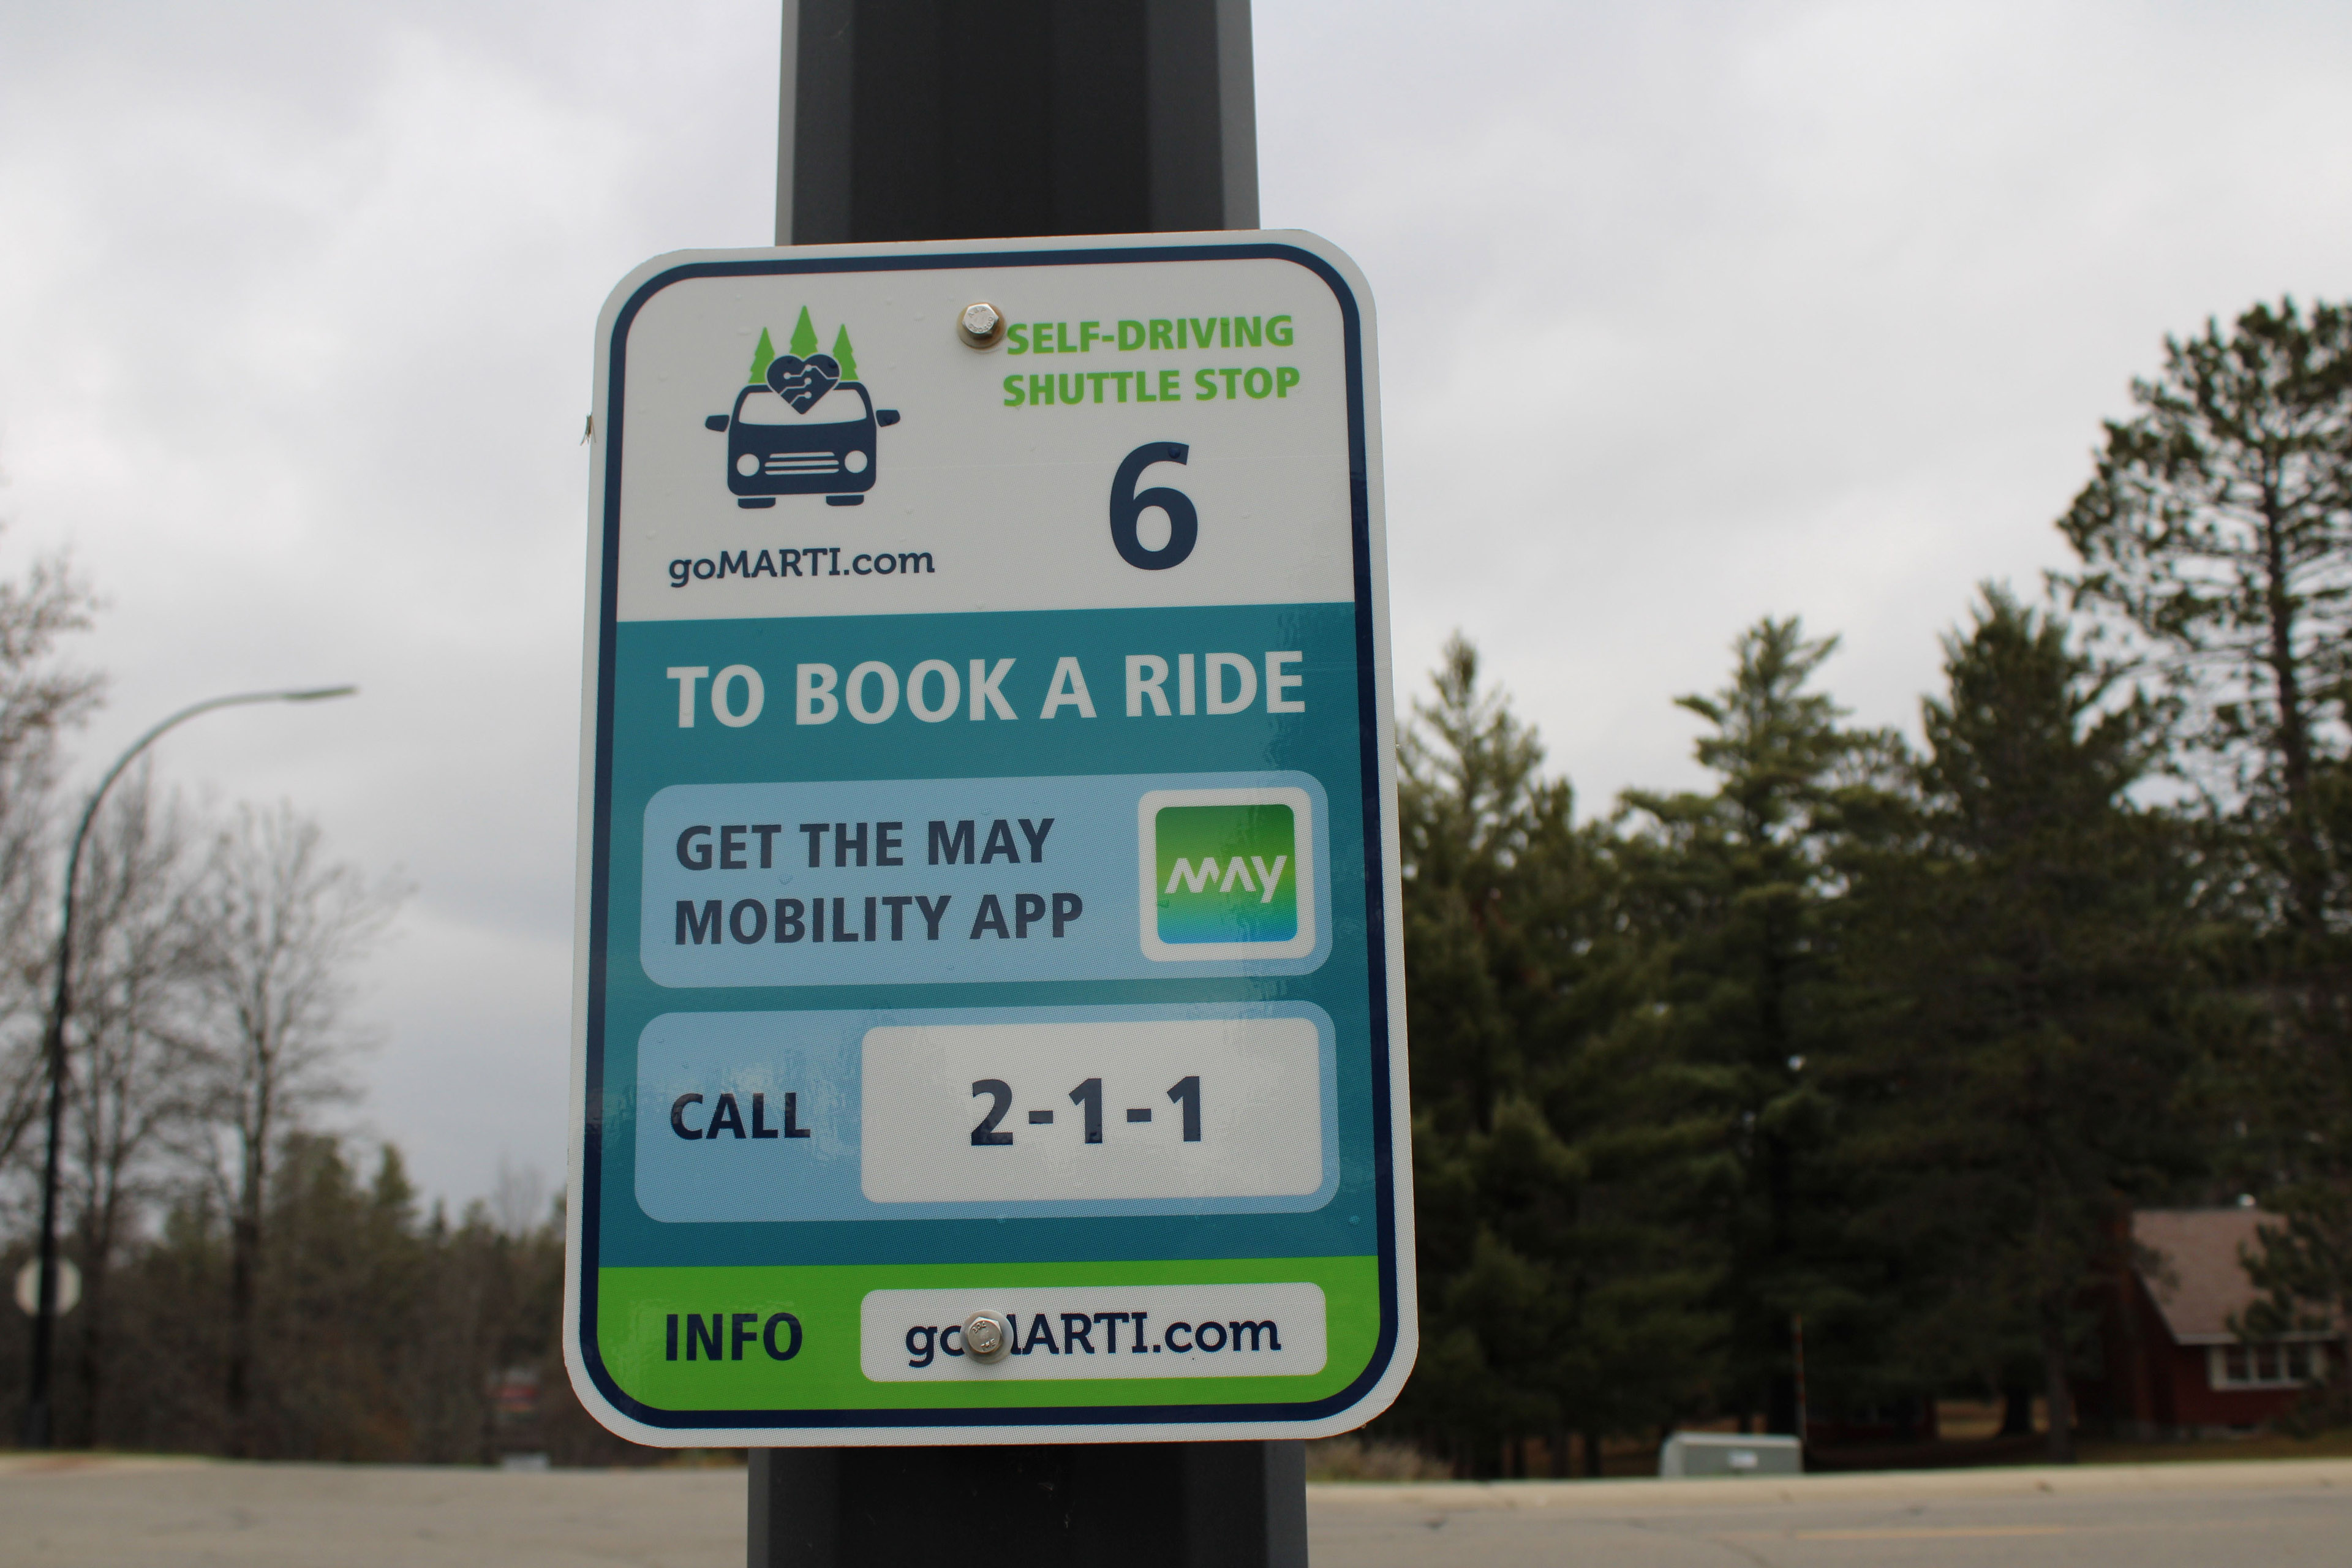 A metal sign is attached to a pole. It has information about how to book a ride for the goMARTI vehicle. It reads, "Self driving shuttle stop 6 / To book a ride get the may mobility app / call 2-1-1 / info: goMARTI.com"